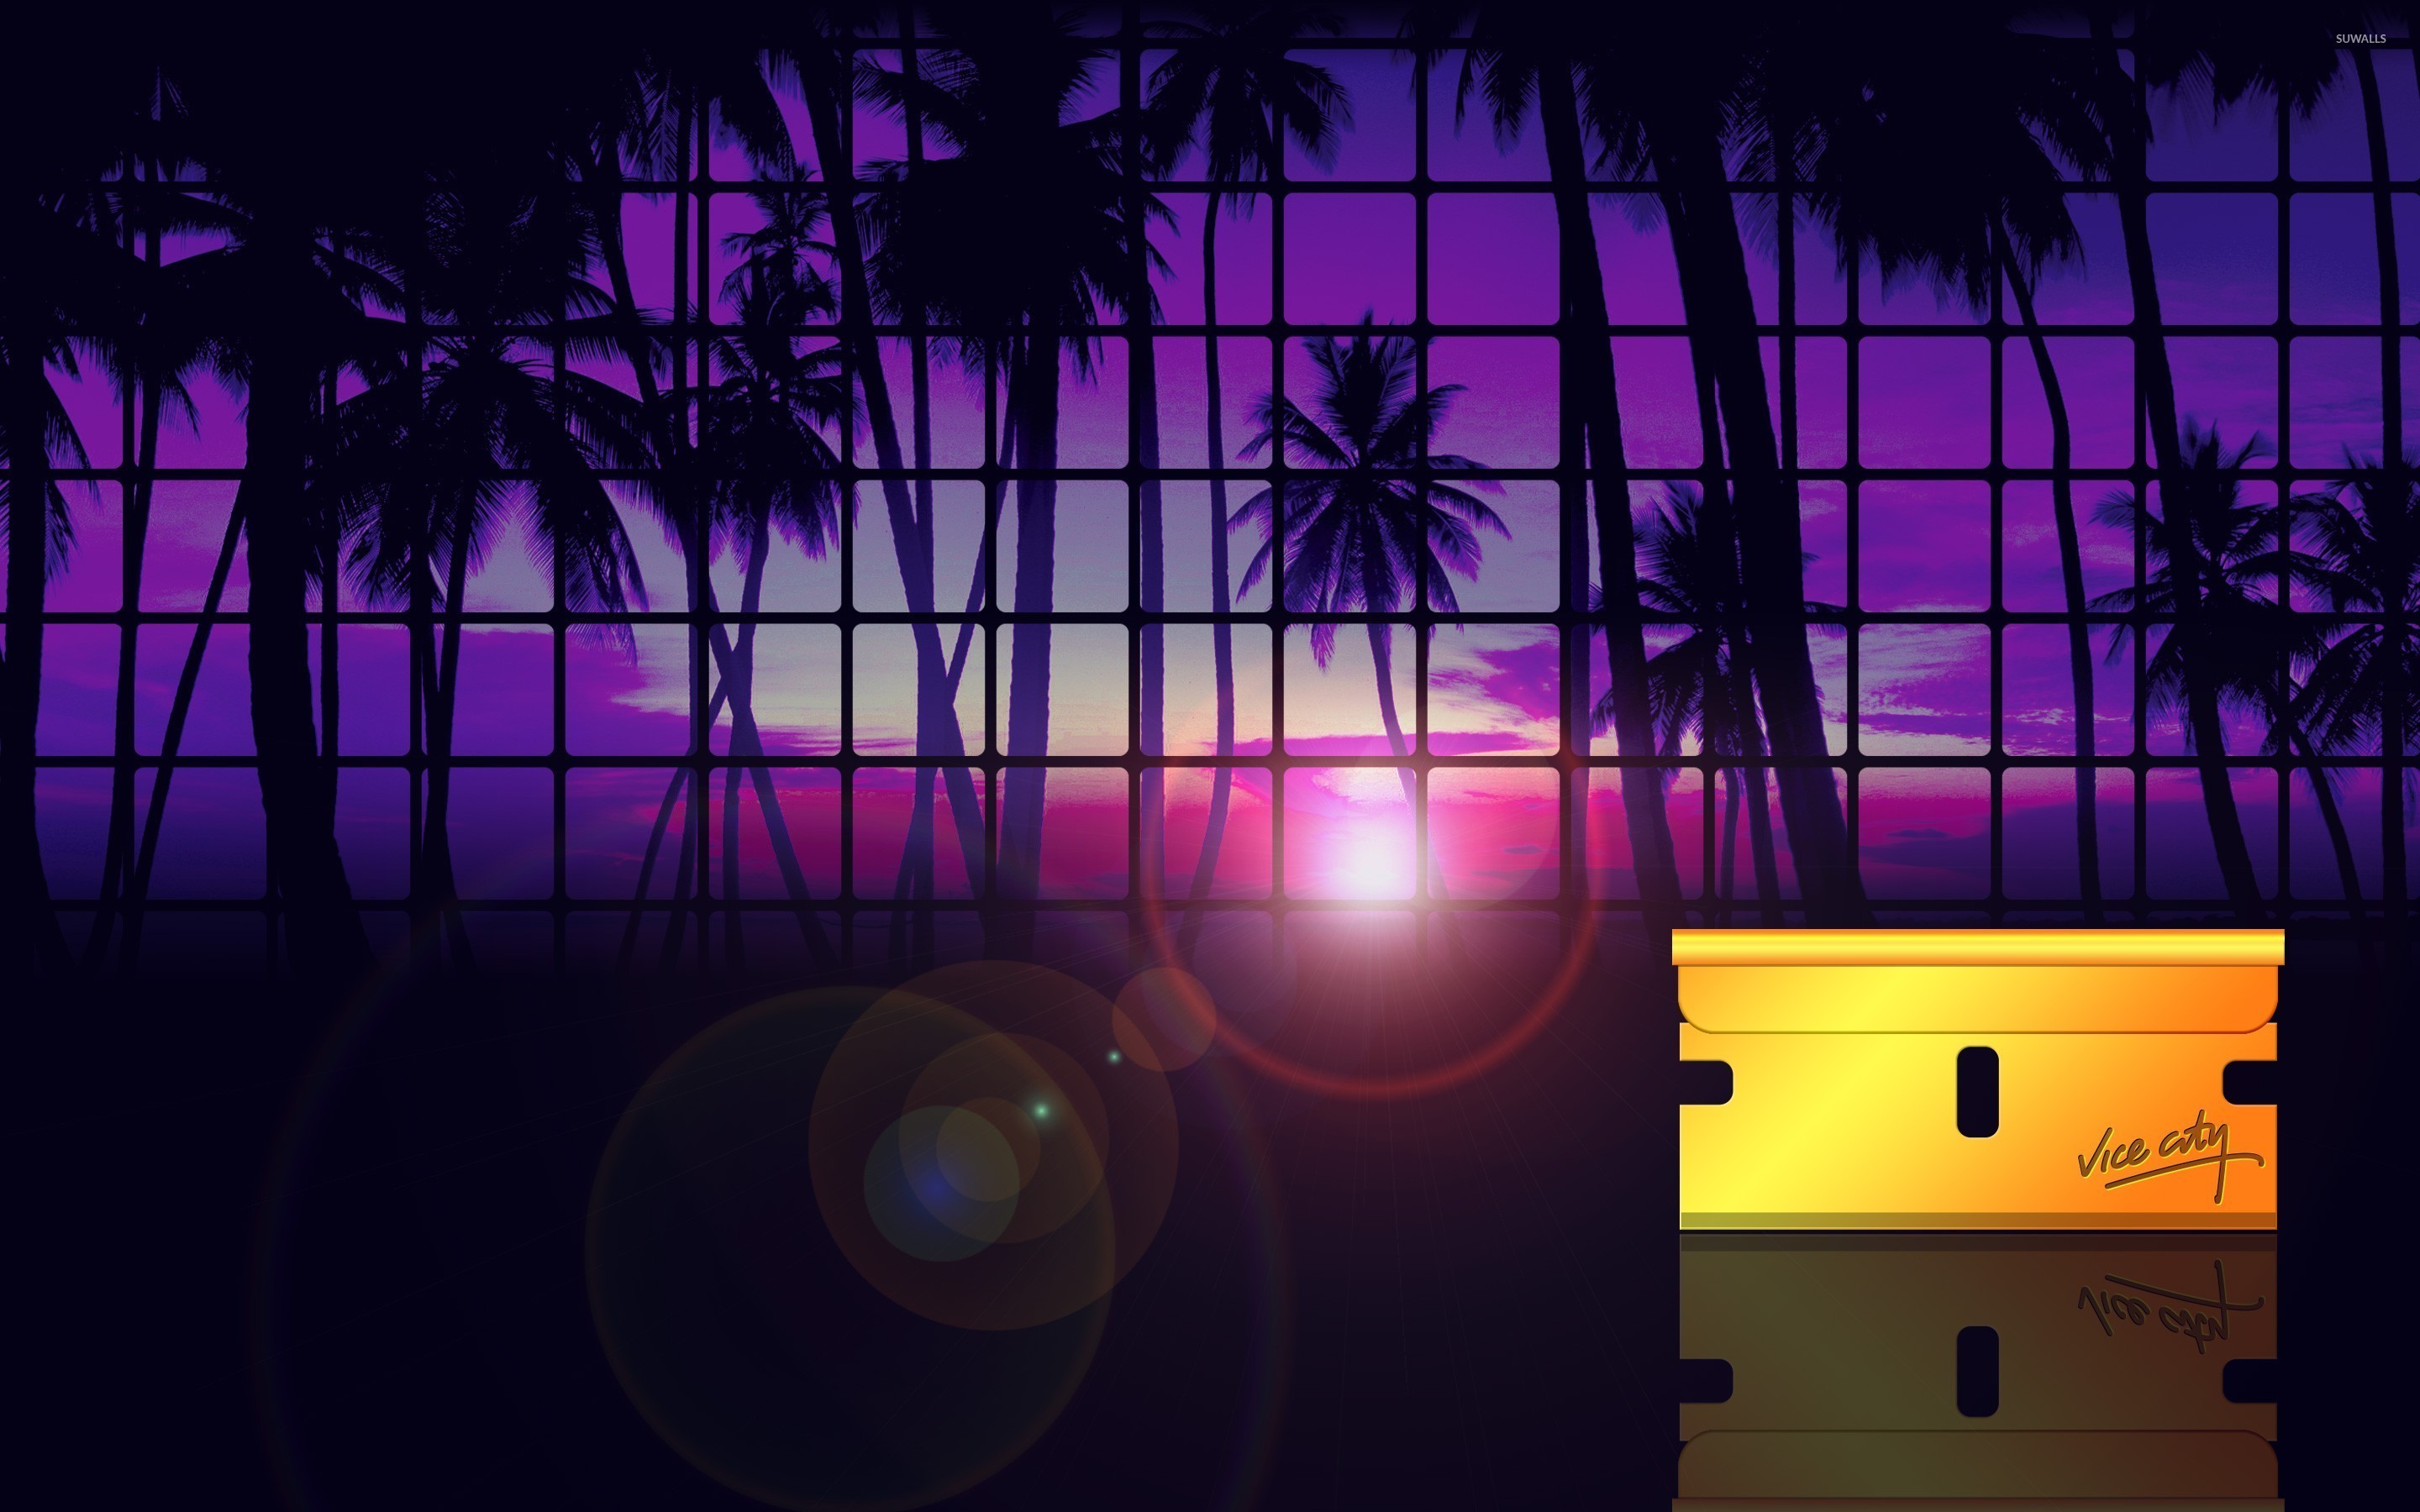 Gta Vice City Wallpapers 67 Pictures